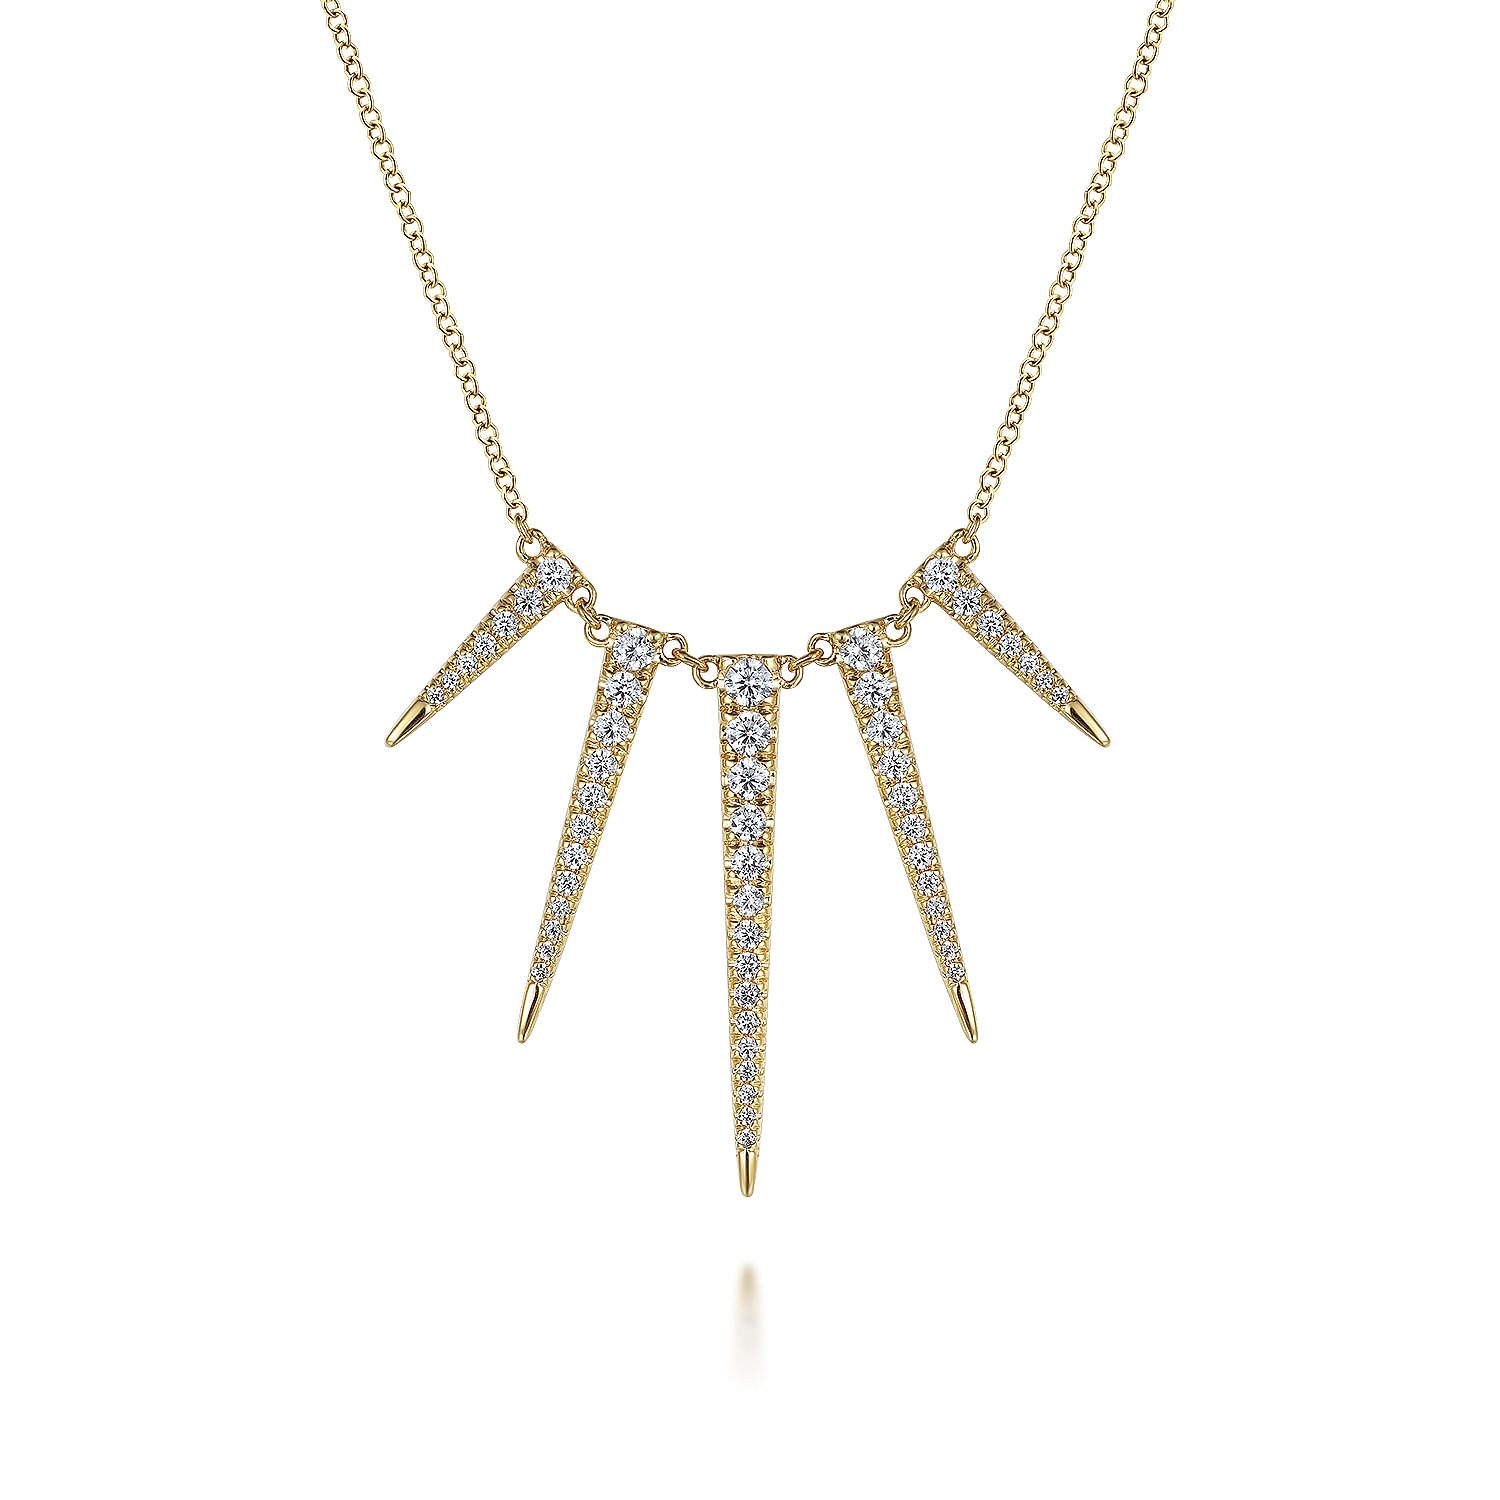 Gabriel - 14K Yellow Gold Edgy Spikes Diamond Necklace